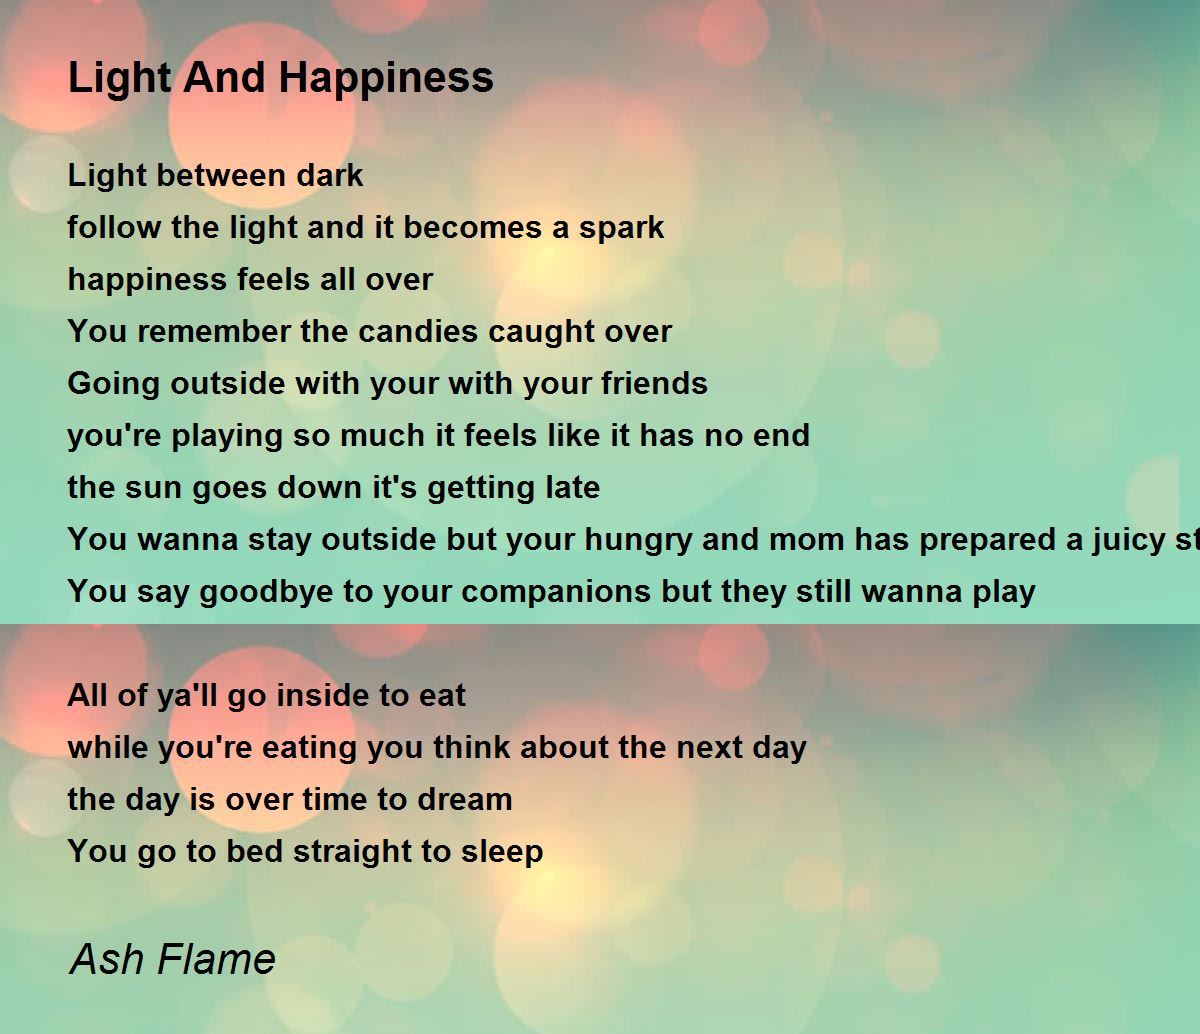 Light And - Light And Happiness Poem Ash Flame